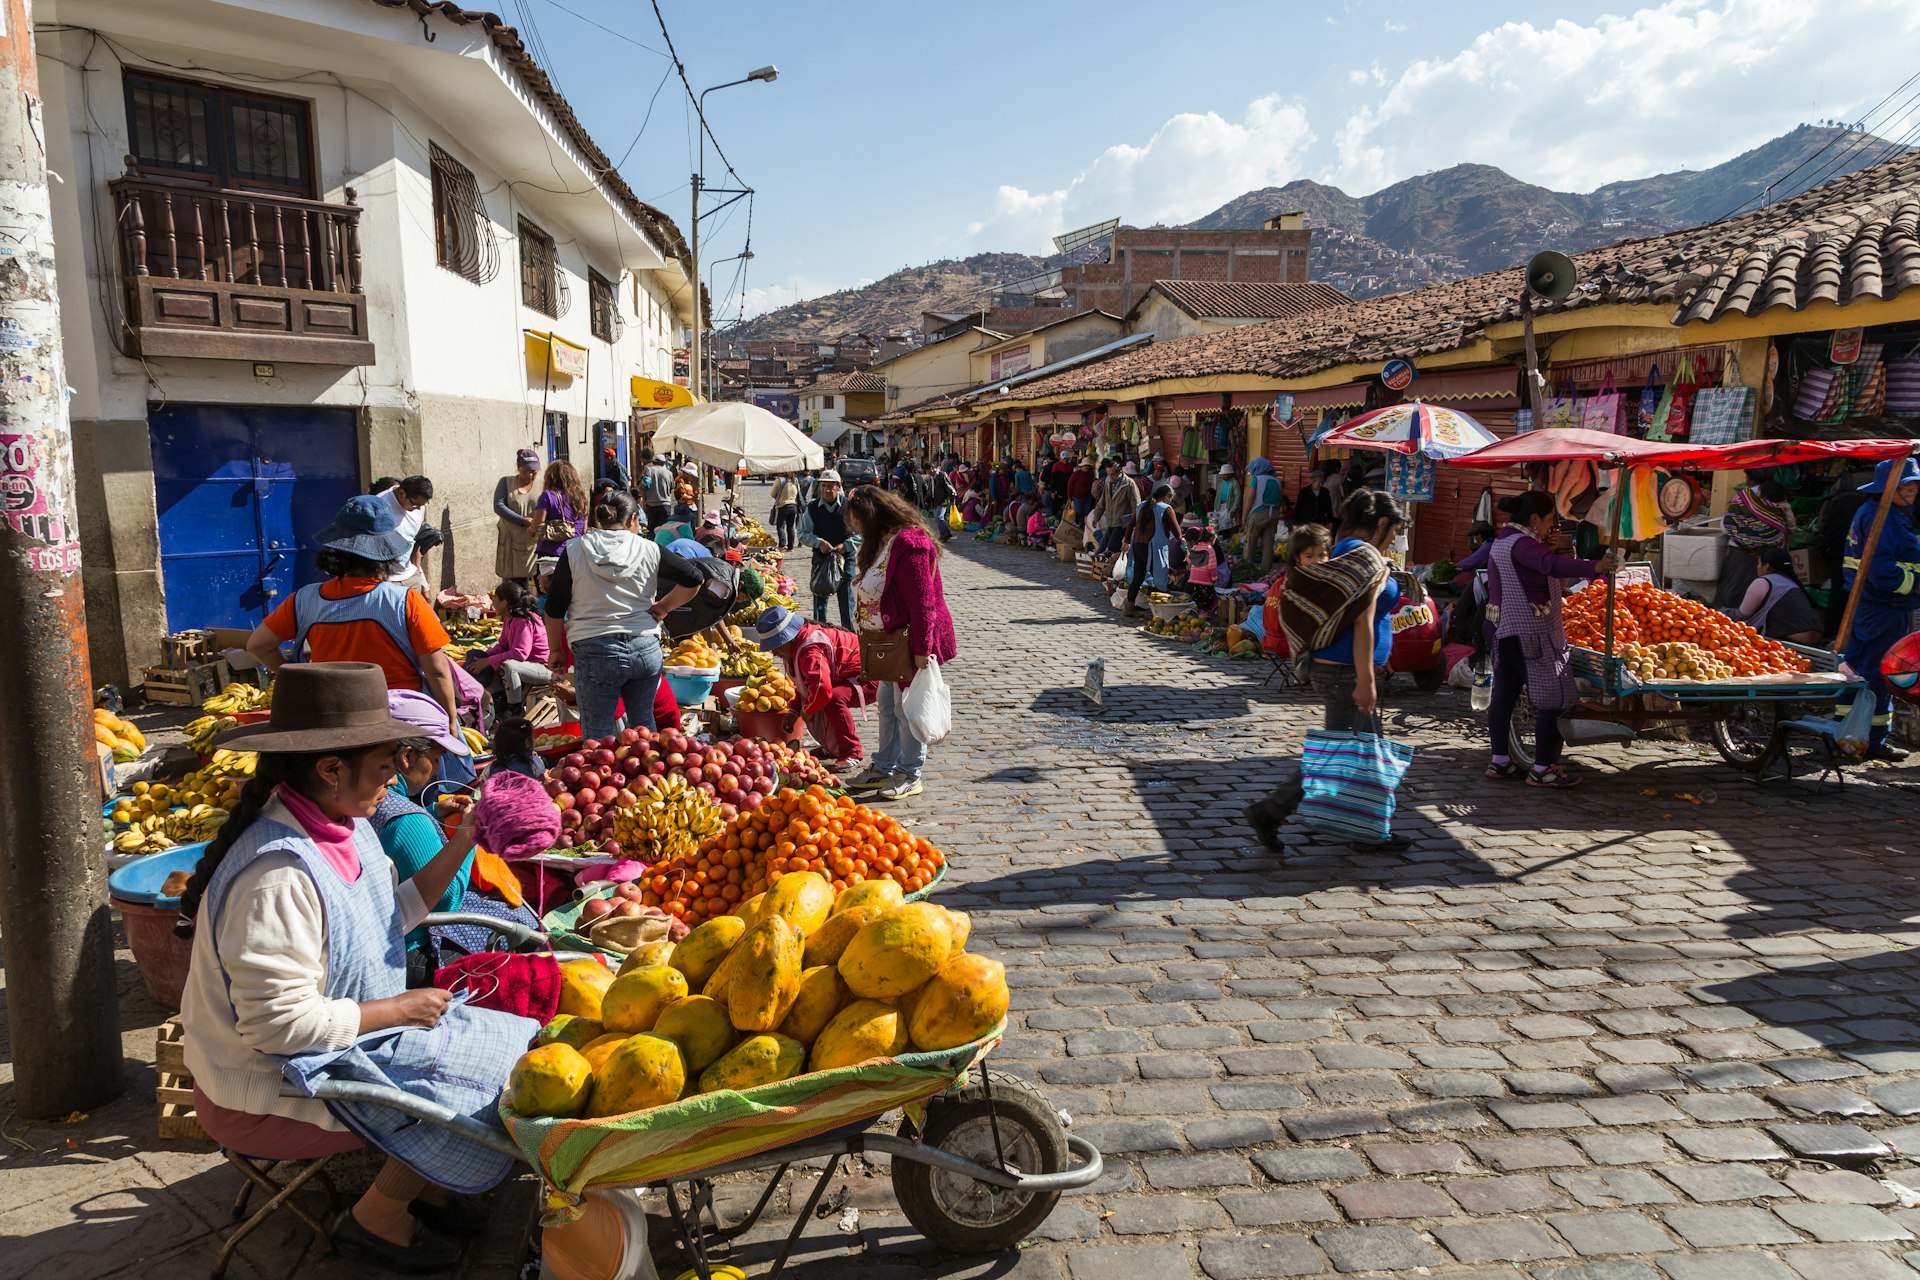 People selling and buying fruits at a market in the streets of Cuzco